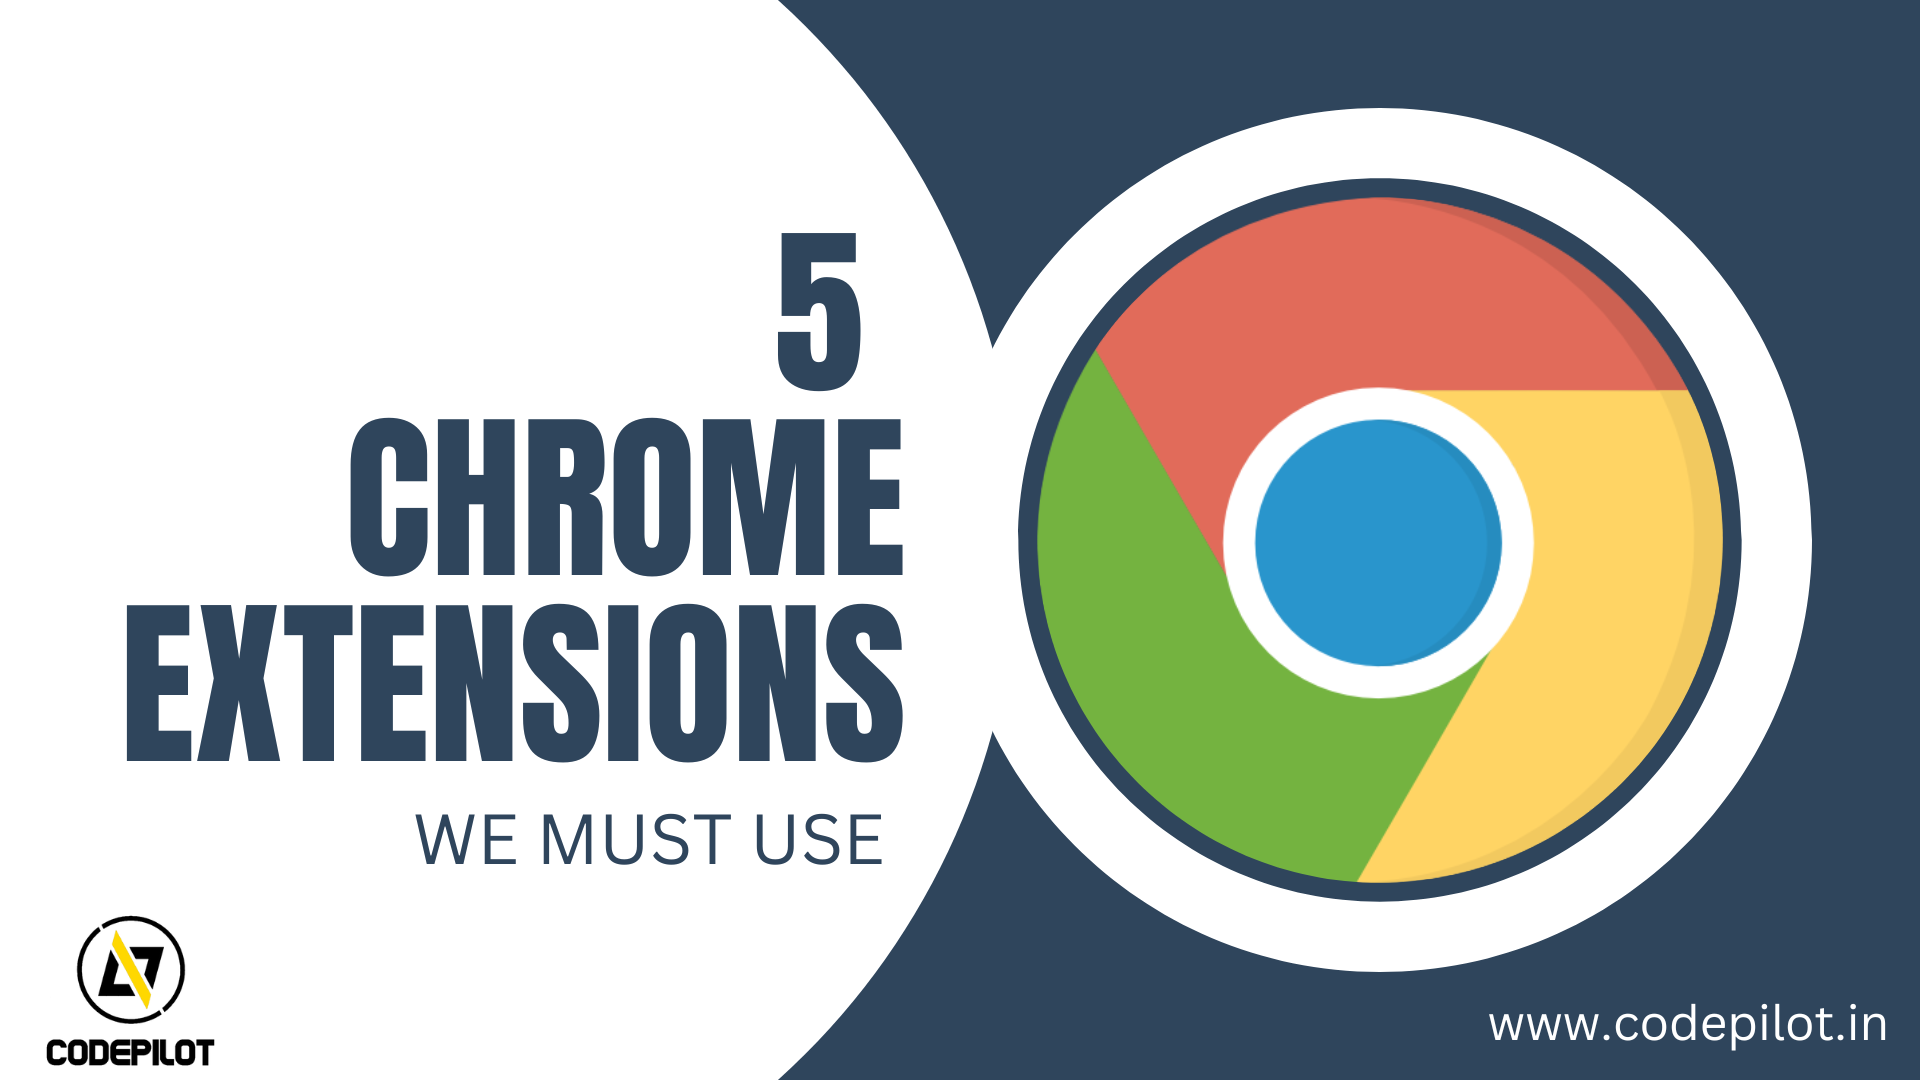 5 Chrome extensions we must use